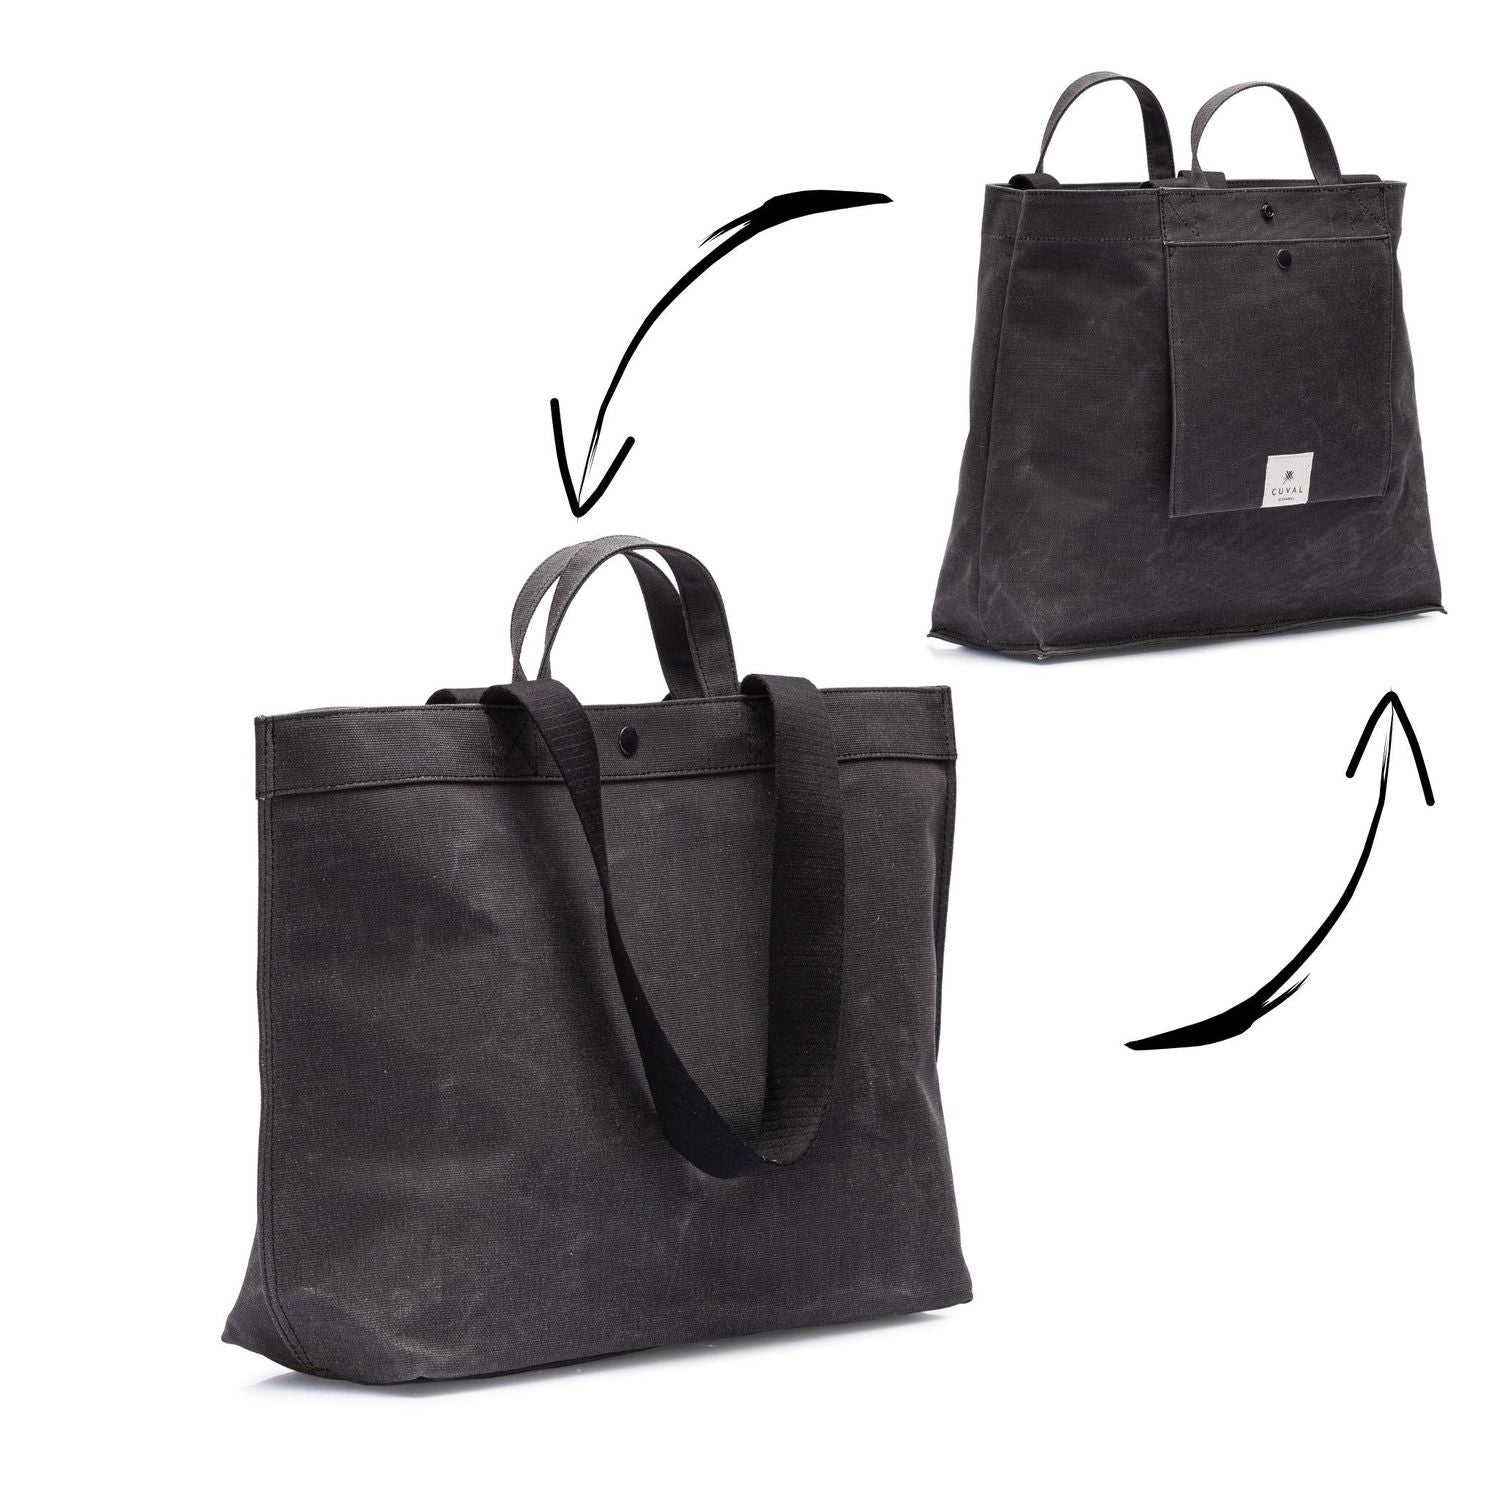 No. 204 Large Tote Charcoal (REVERSIBLE)